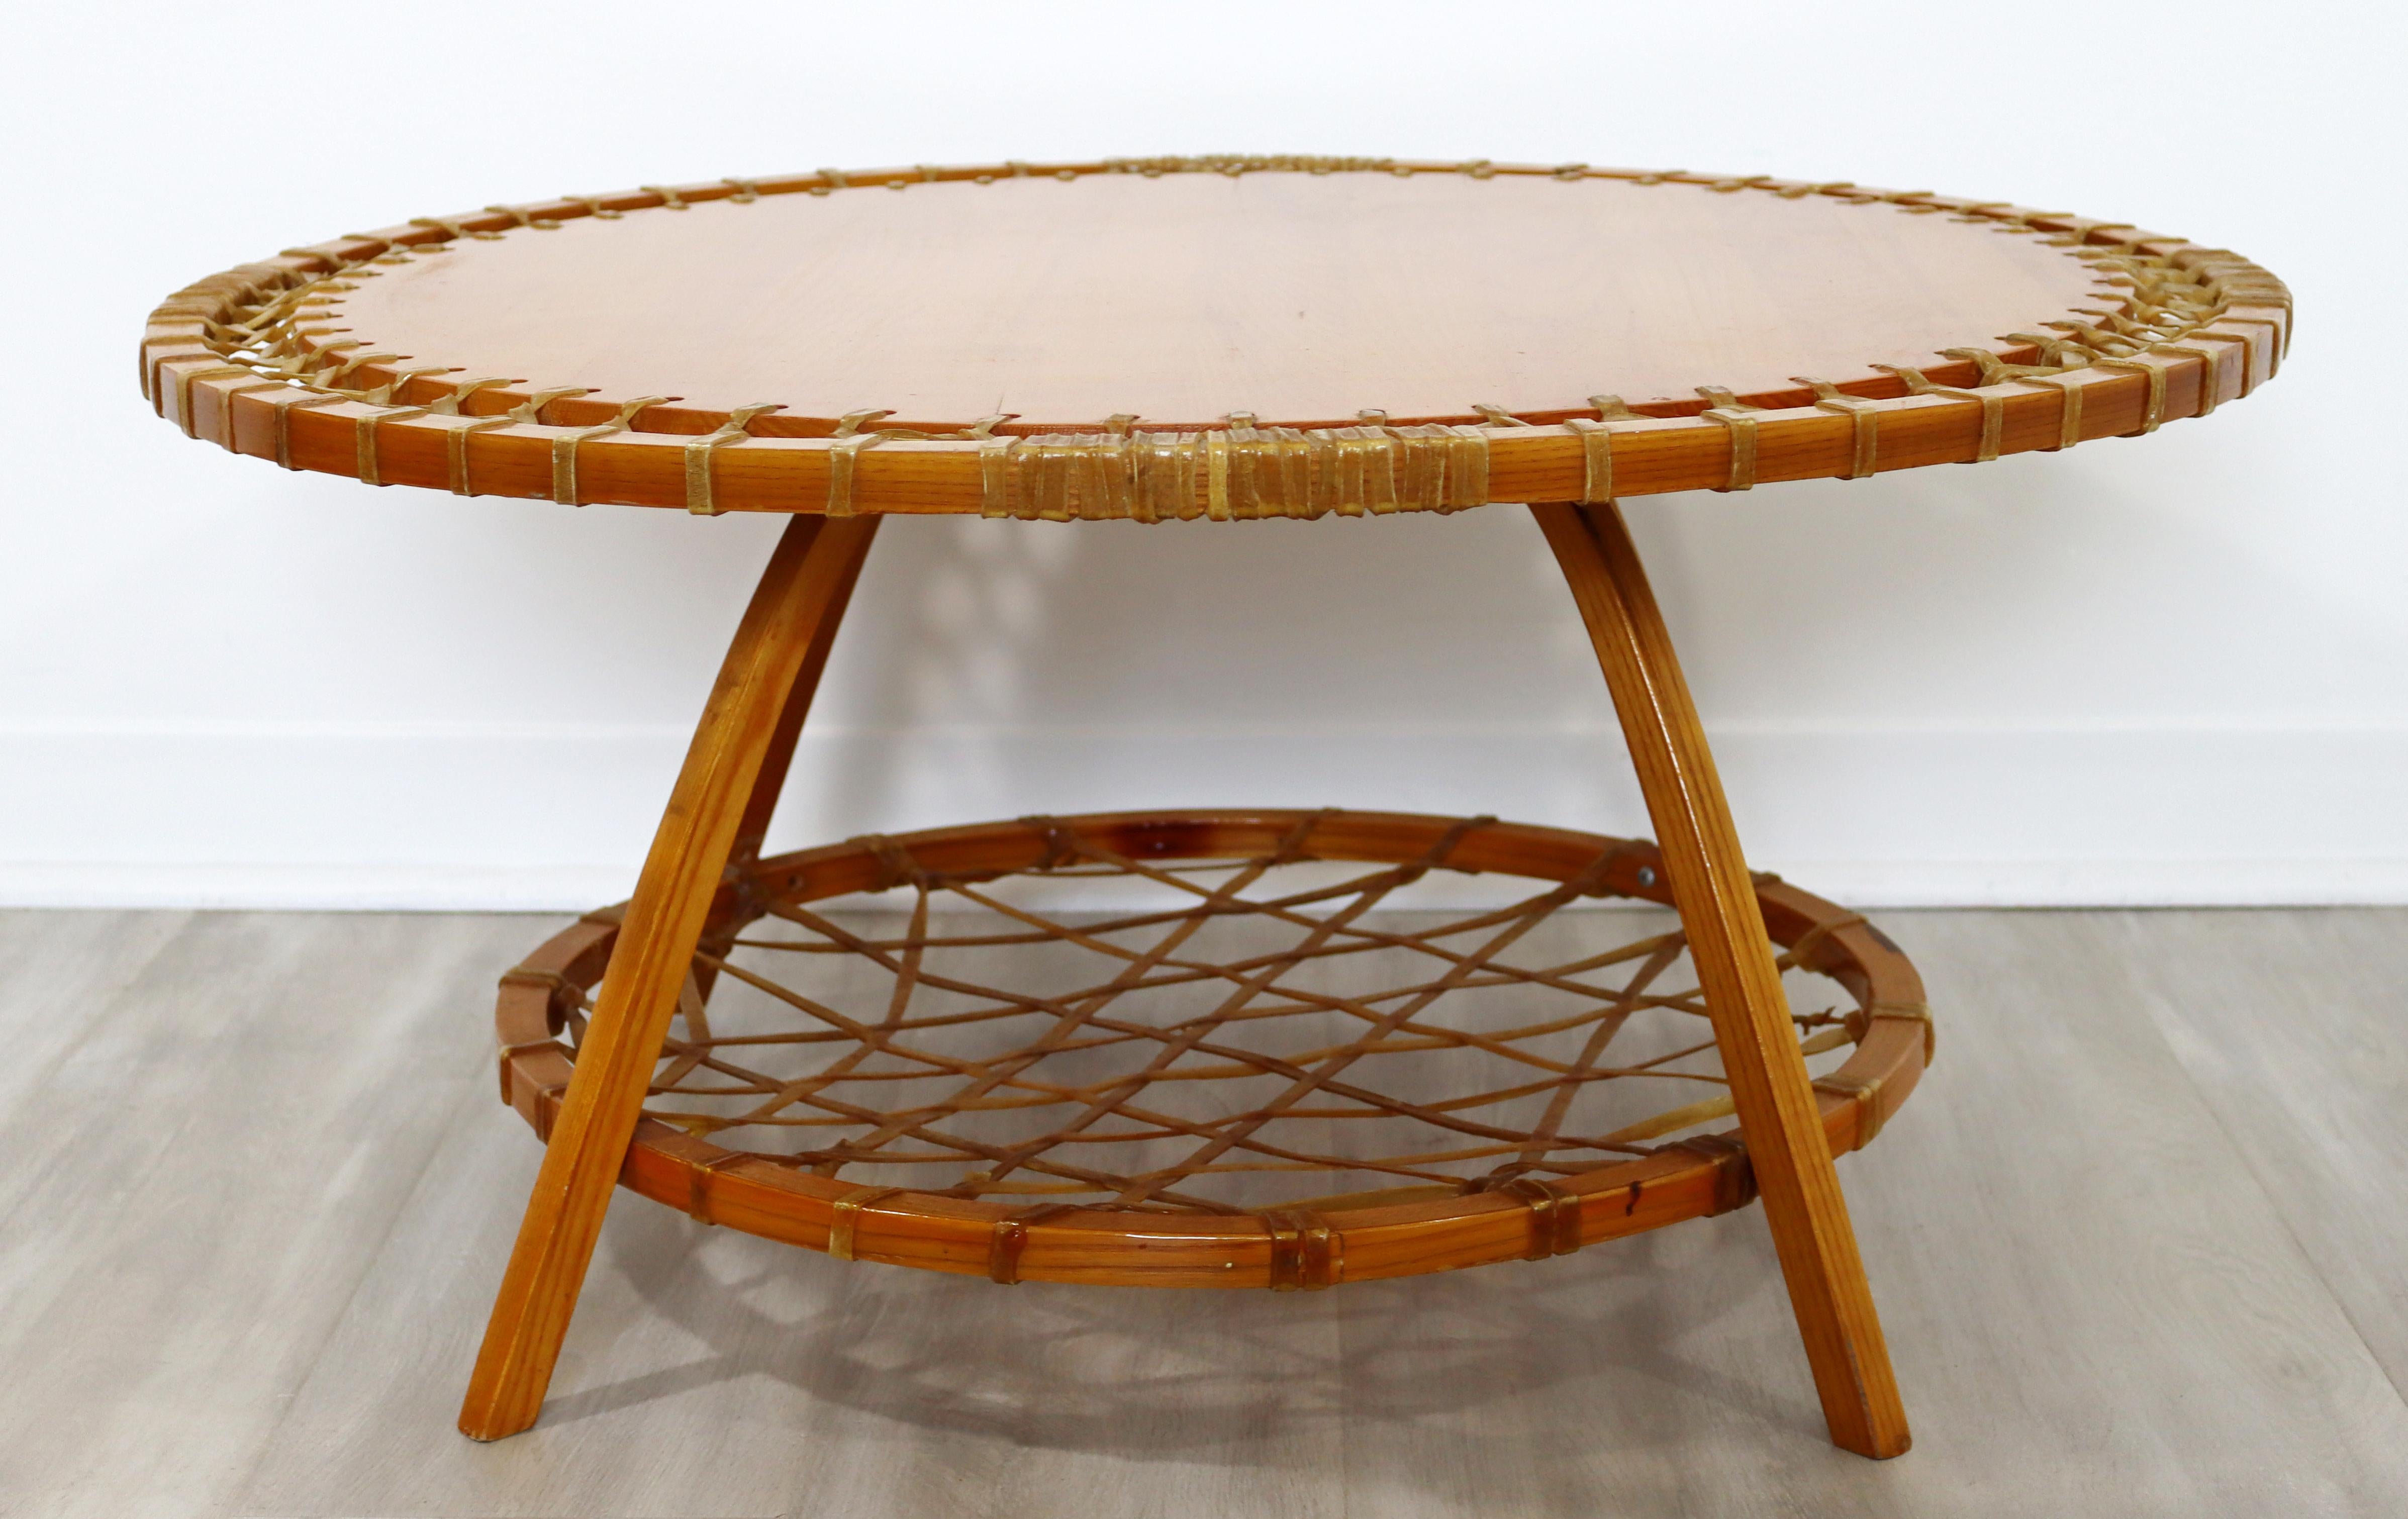 For your consideration is an outstanding, round, oak coffee table, with rawhide webbing like snow shoes, by Snocraft, circa the 1970s. In excellent vintage condition. The dimensions are 32